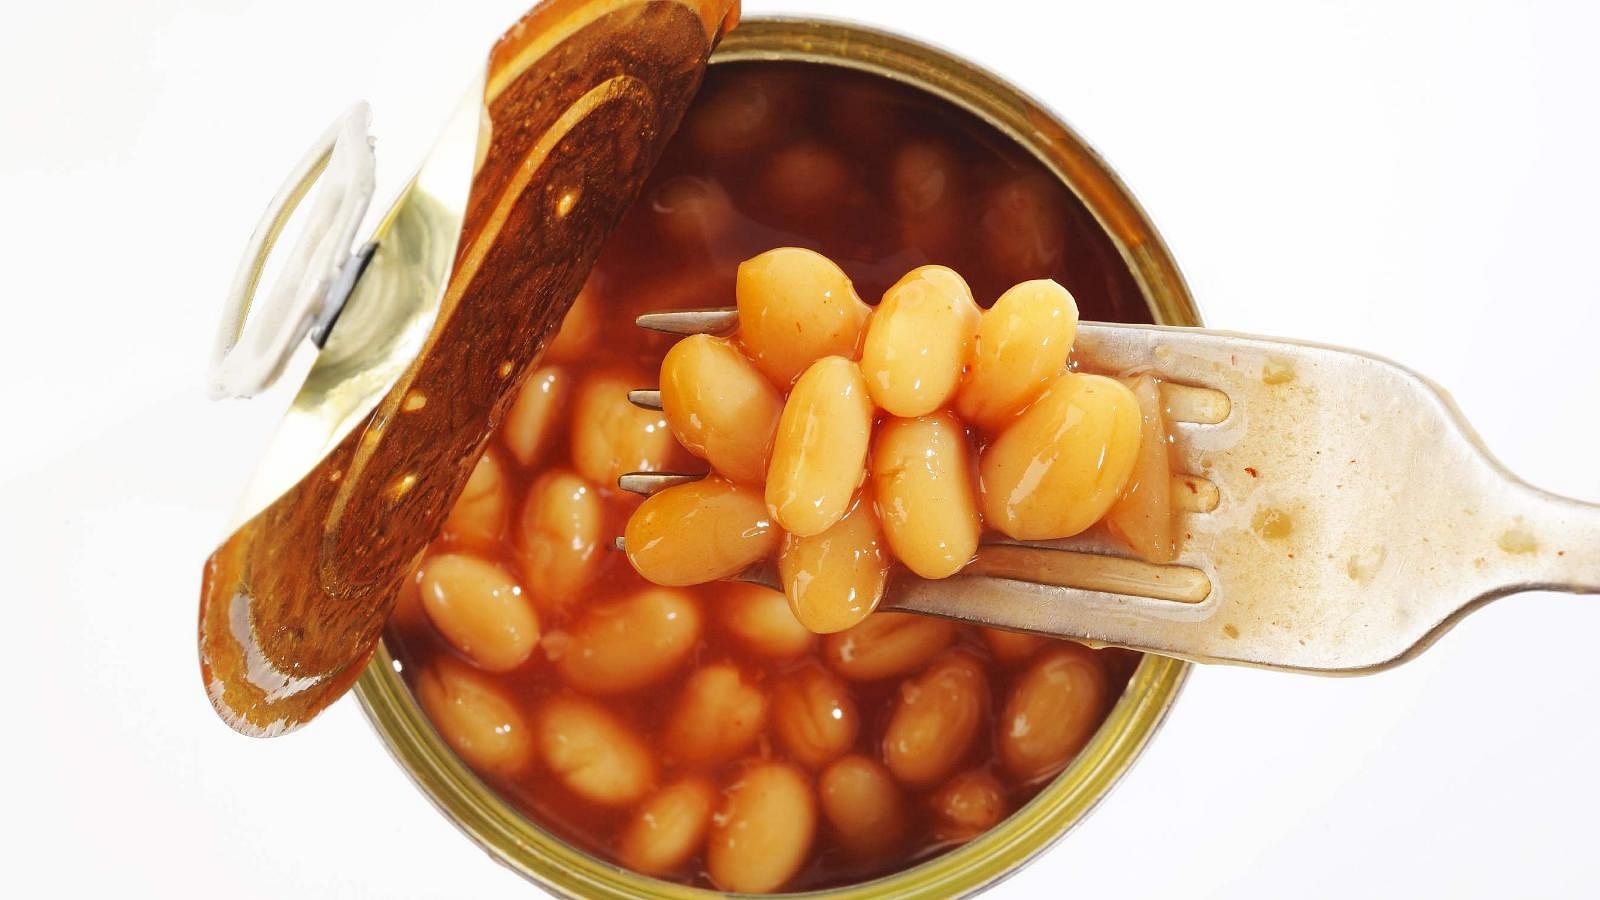 Before you reach for canned foods, read what’s really inside them (Photo: iStock)